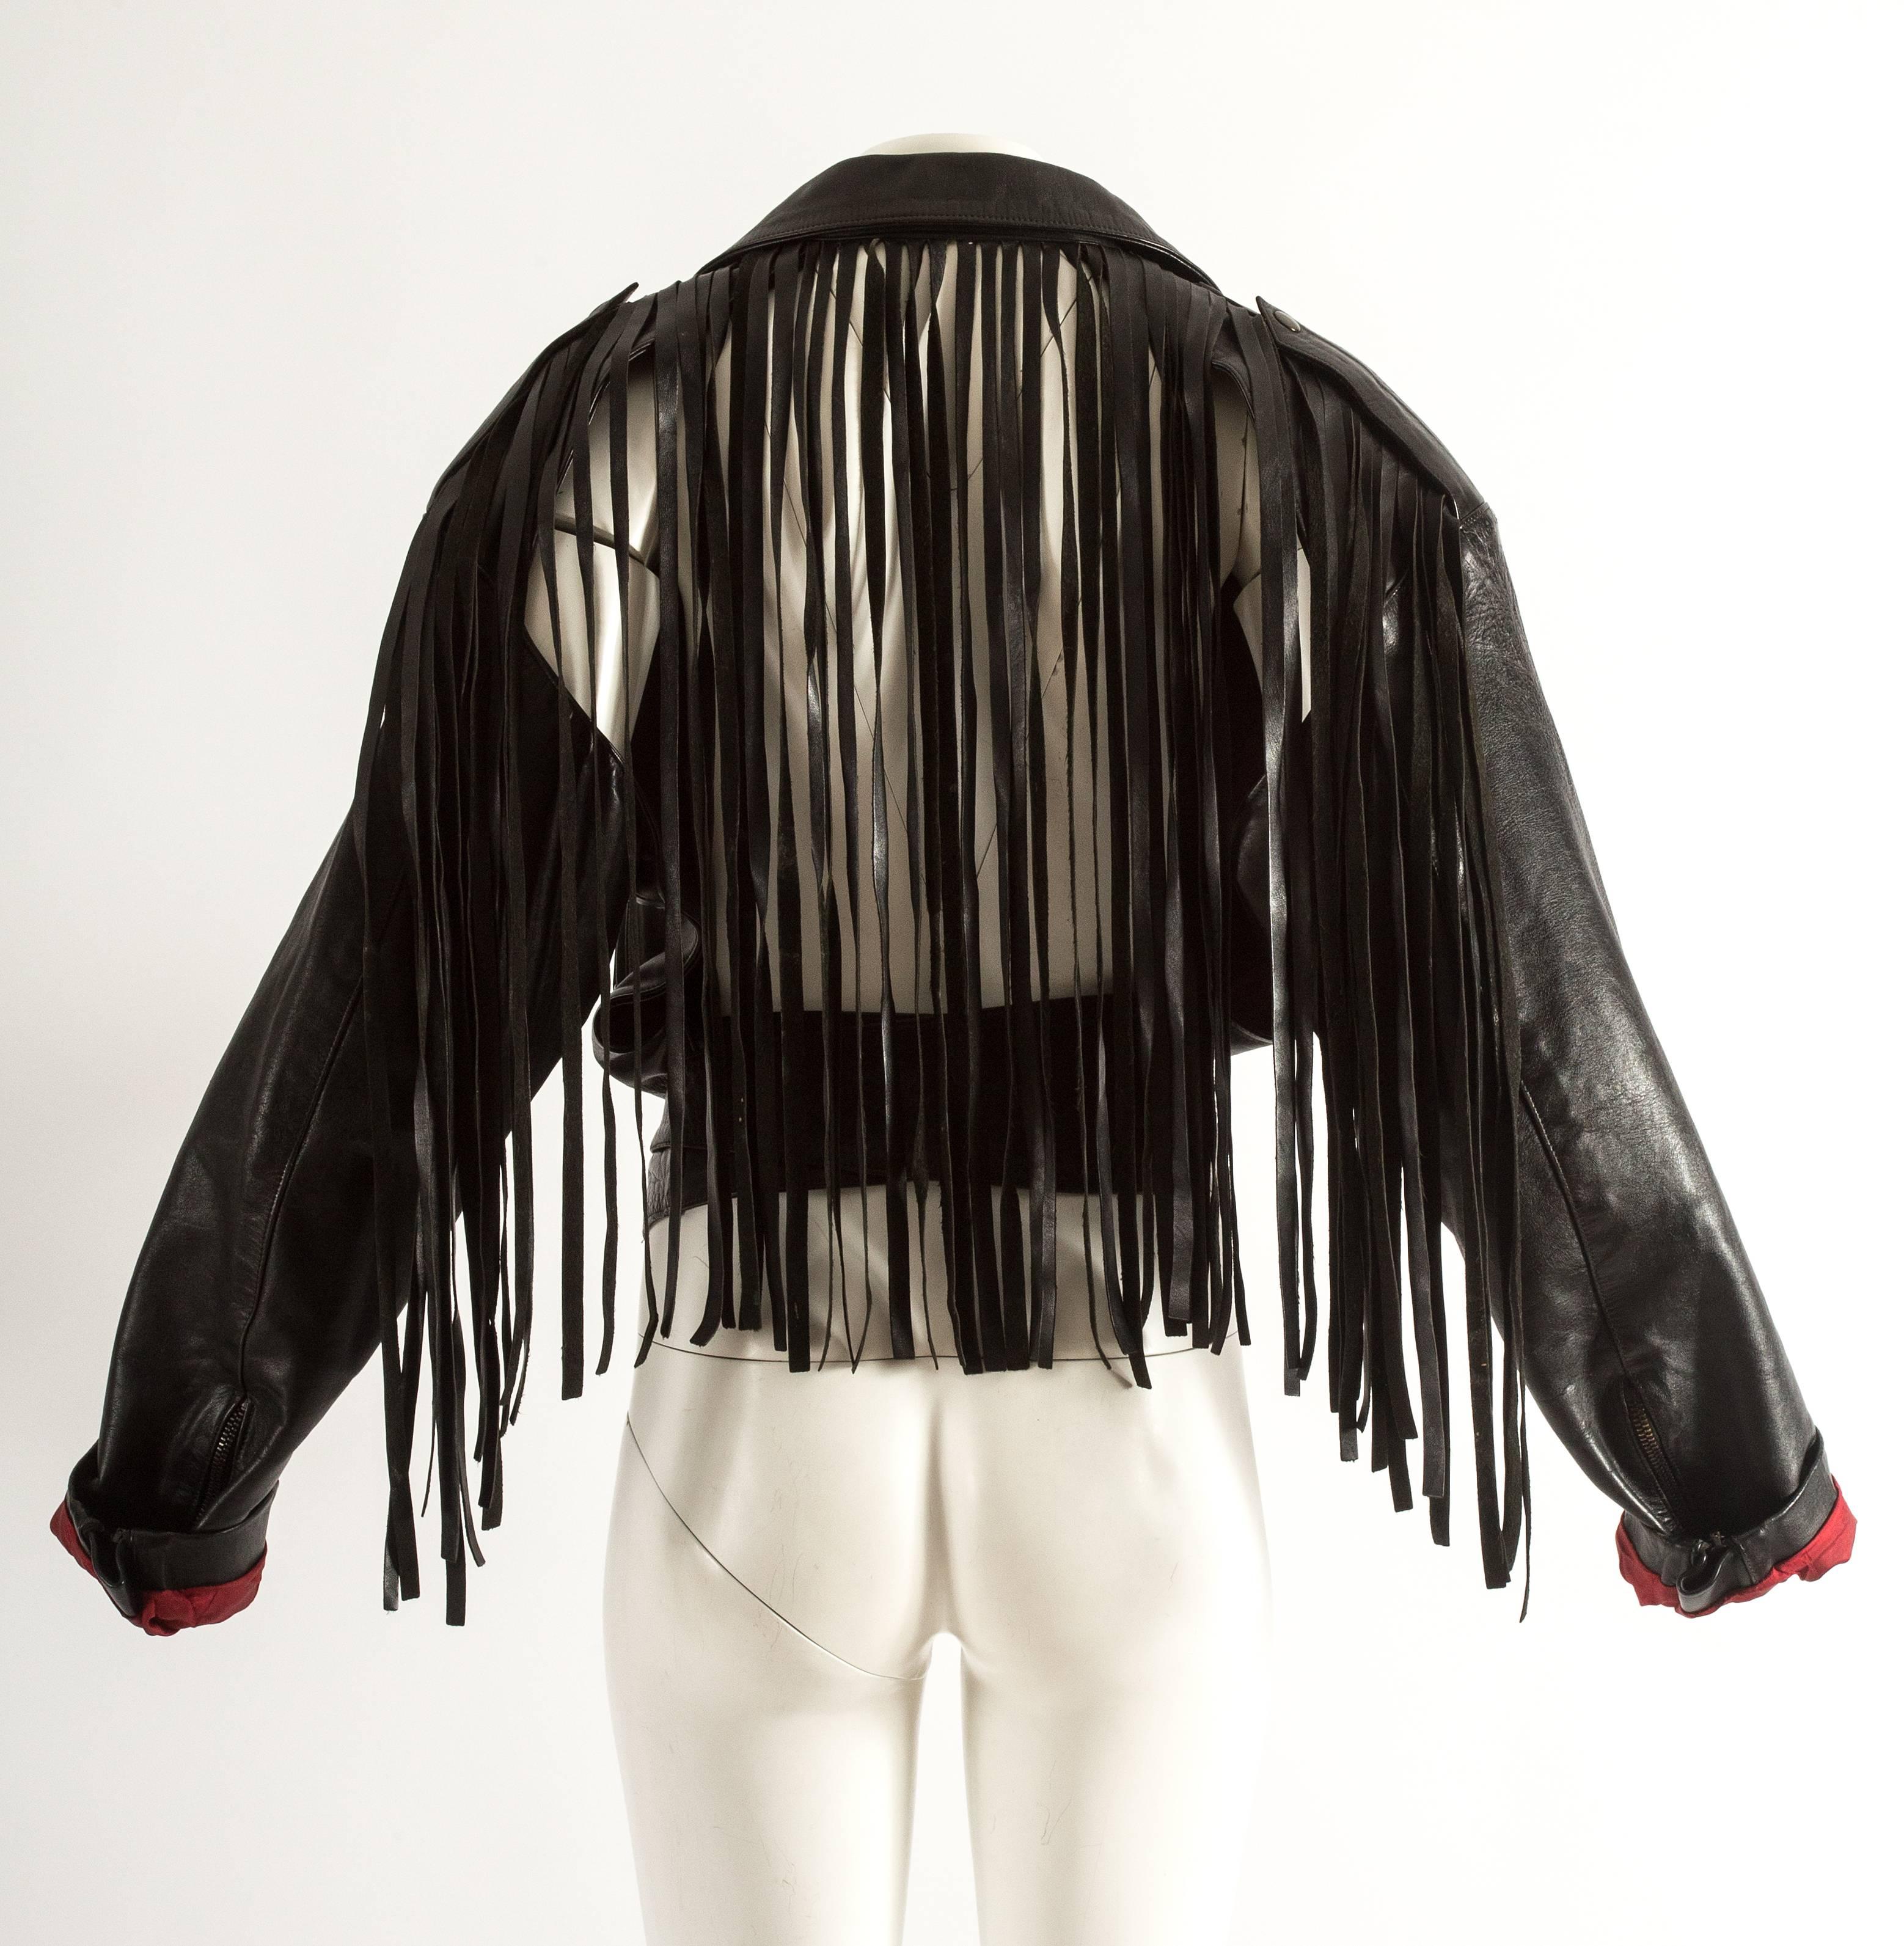 Jean Paul Gaultier Spring-Summer 1985 fringed leather jacket with open back and wrap belt fastening

Provenance: Pete Burns (Dead or Alive)